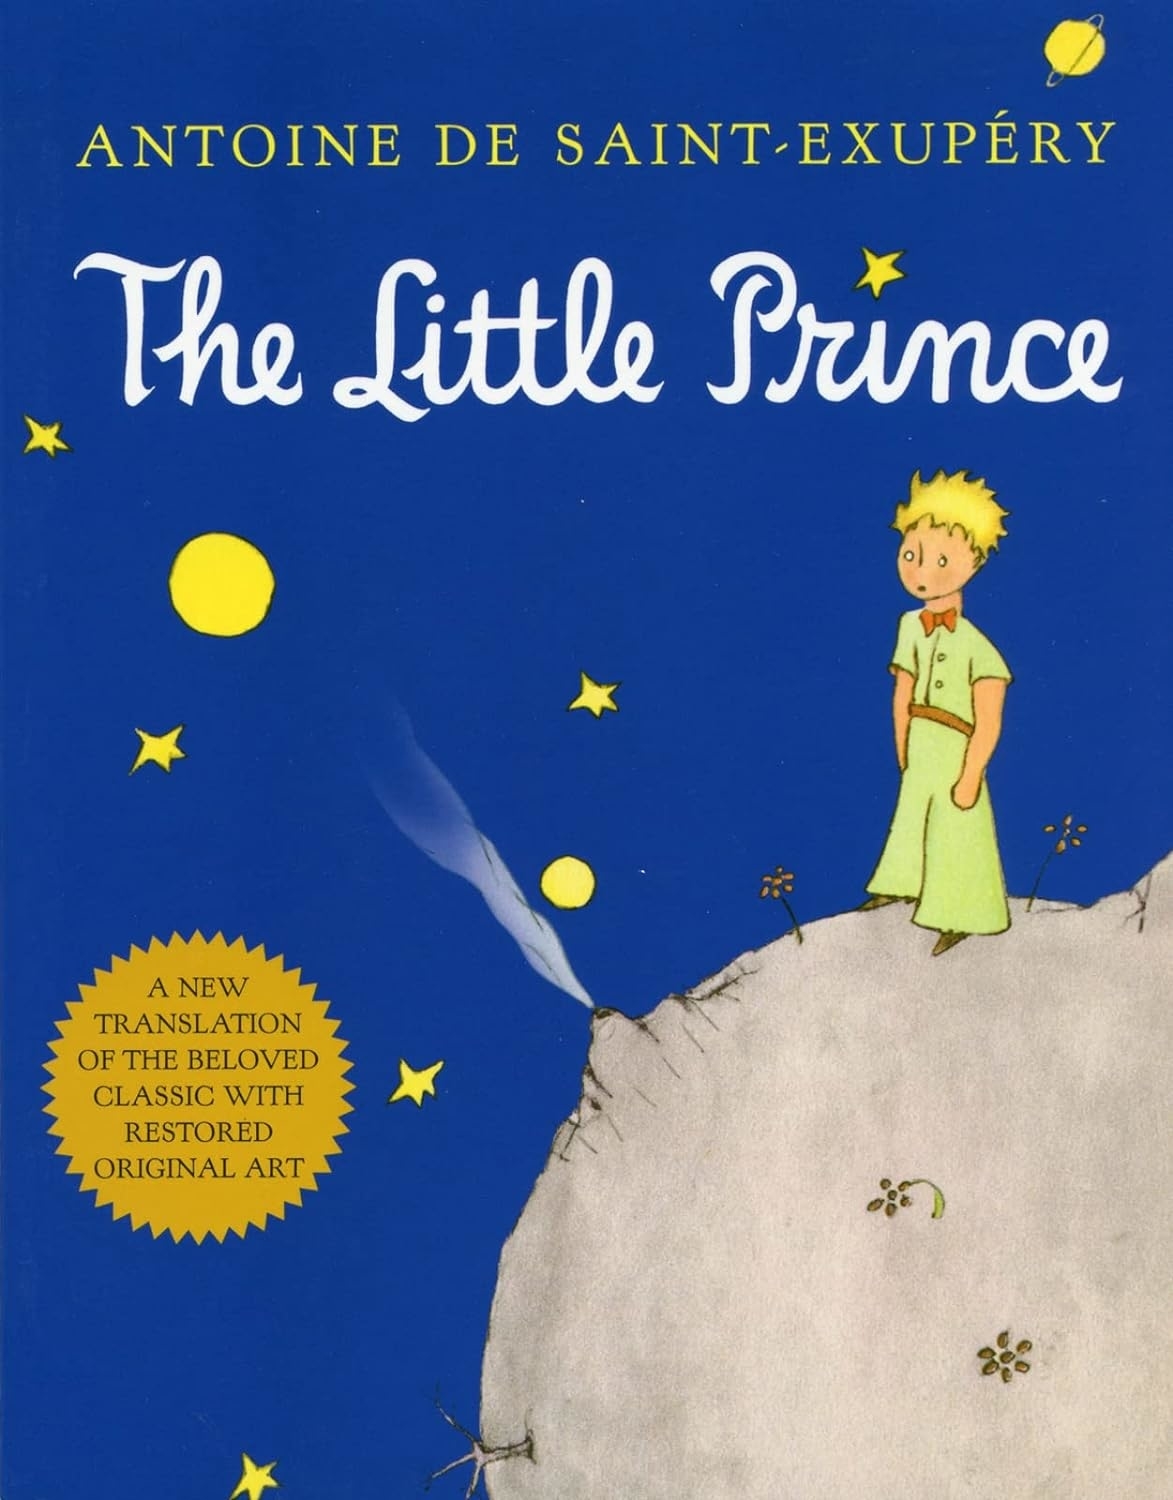 Cover of &quot;The Little Prince&quot; featuring the Prince standing on a planet with stars and a comet above